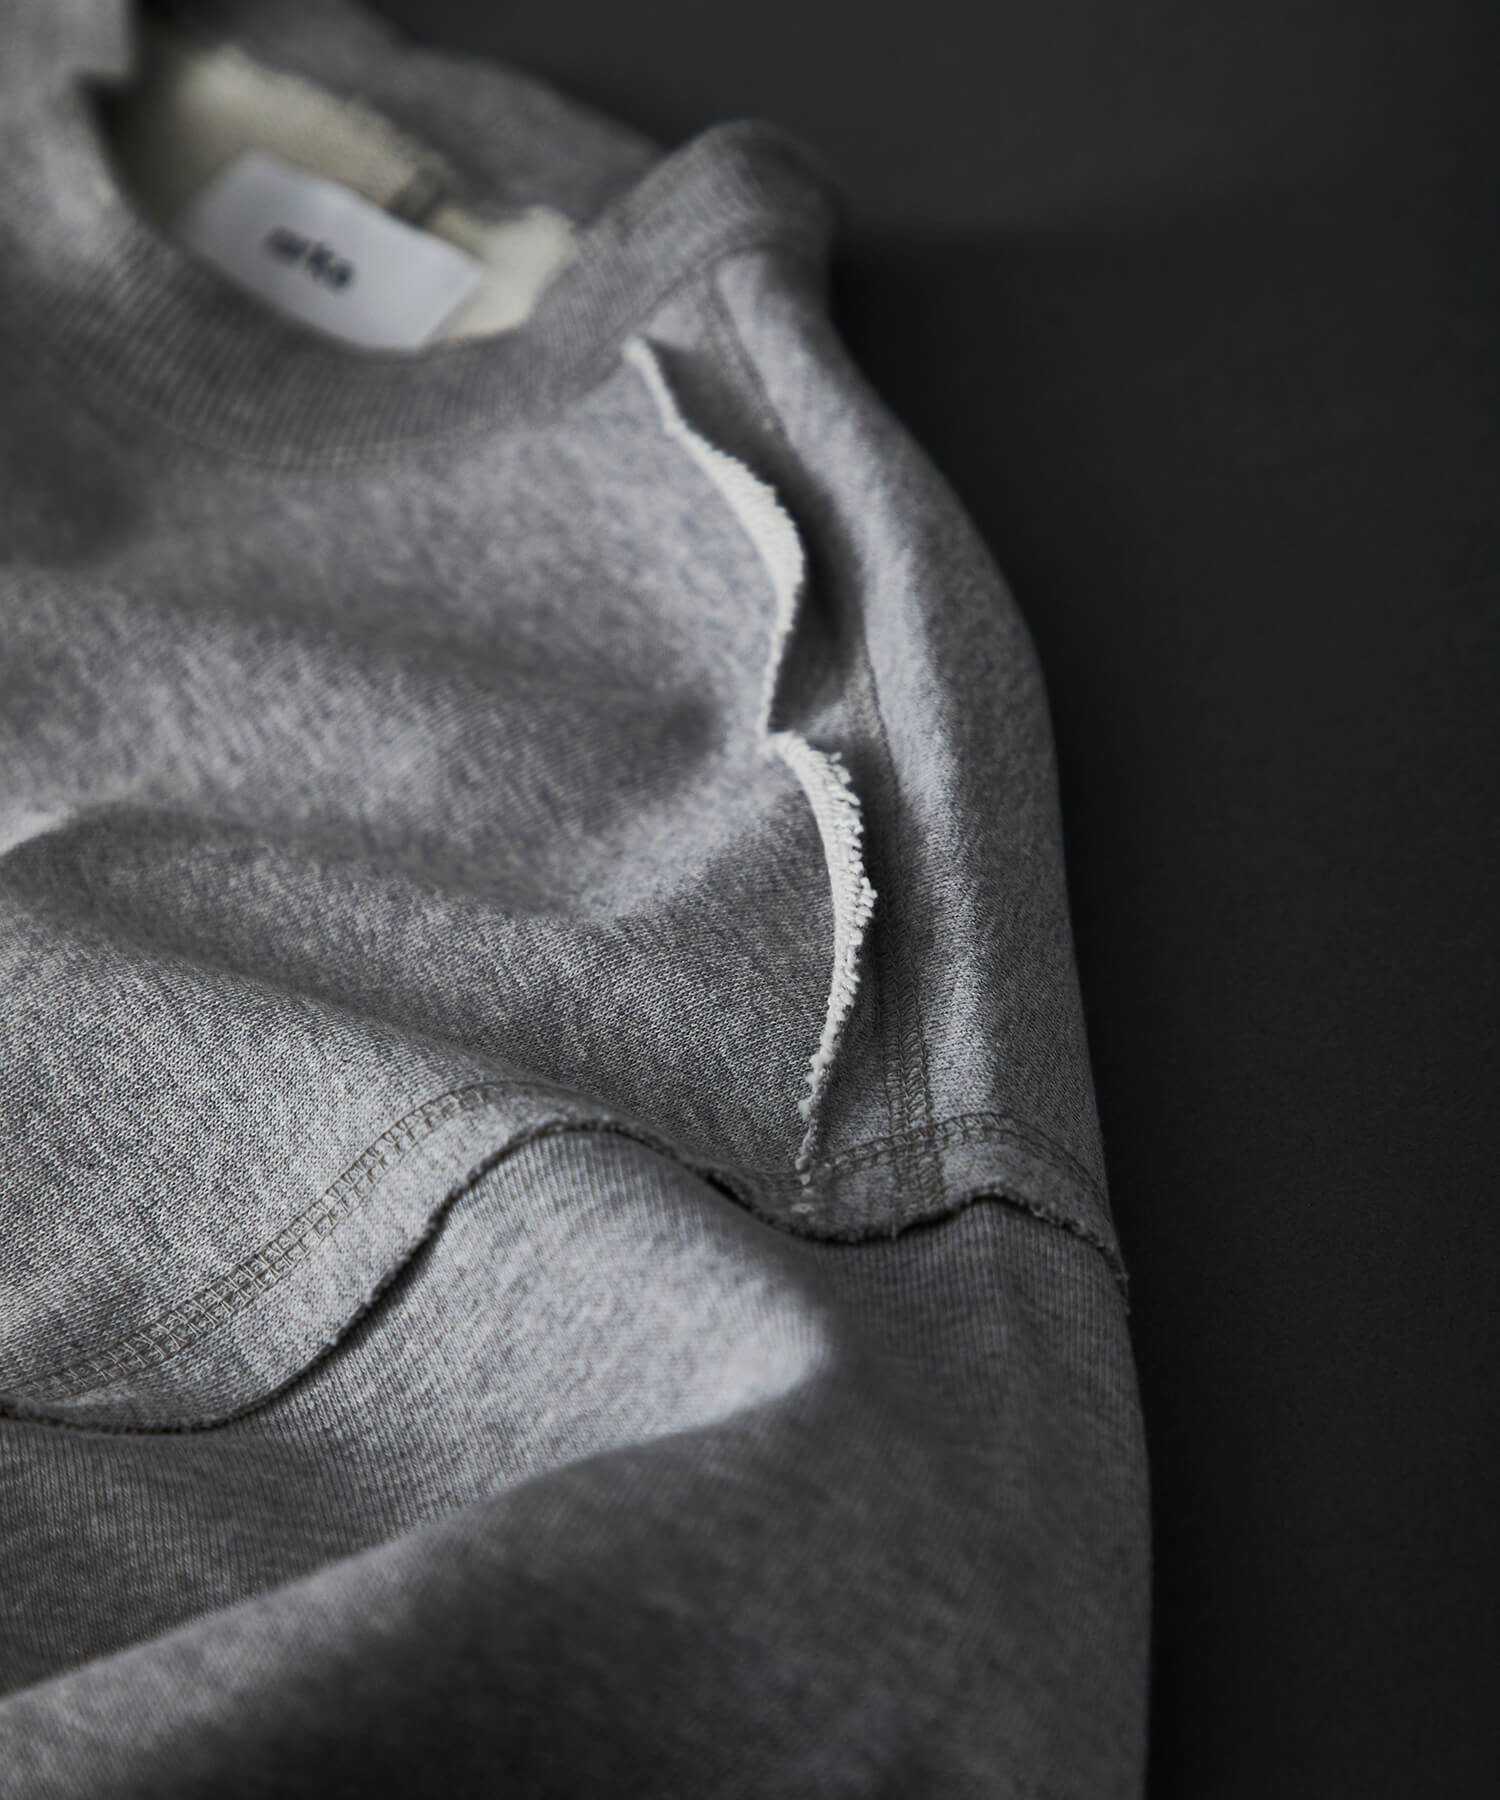 marka EXCLUSIVE SWEAT | STUDIOUS｜ STUDIOUS ONLINE公式通販サイト